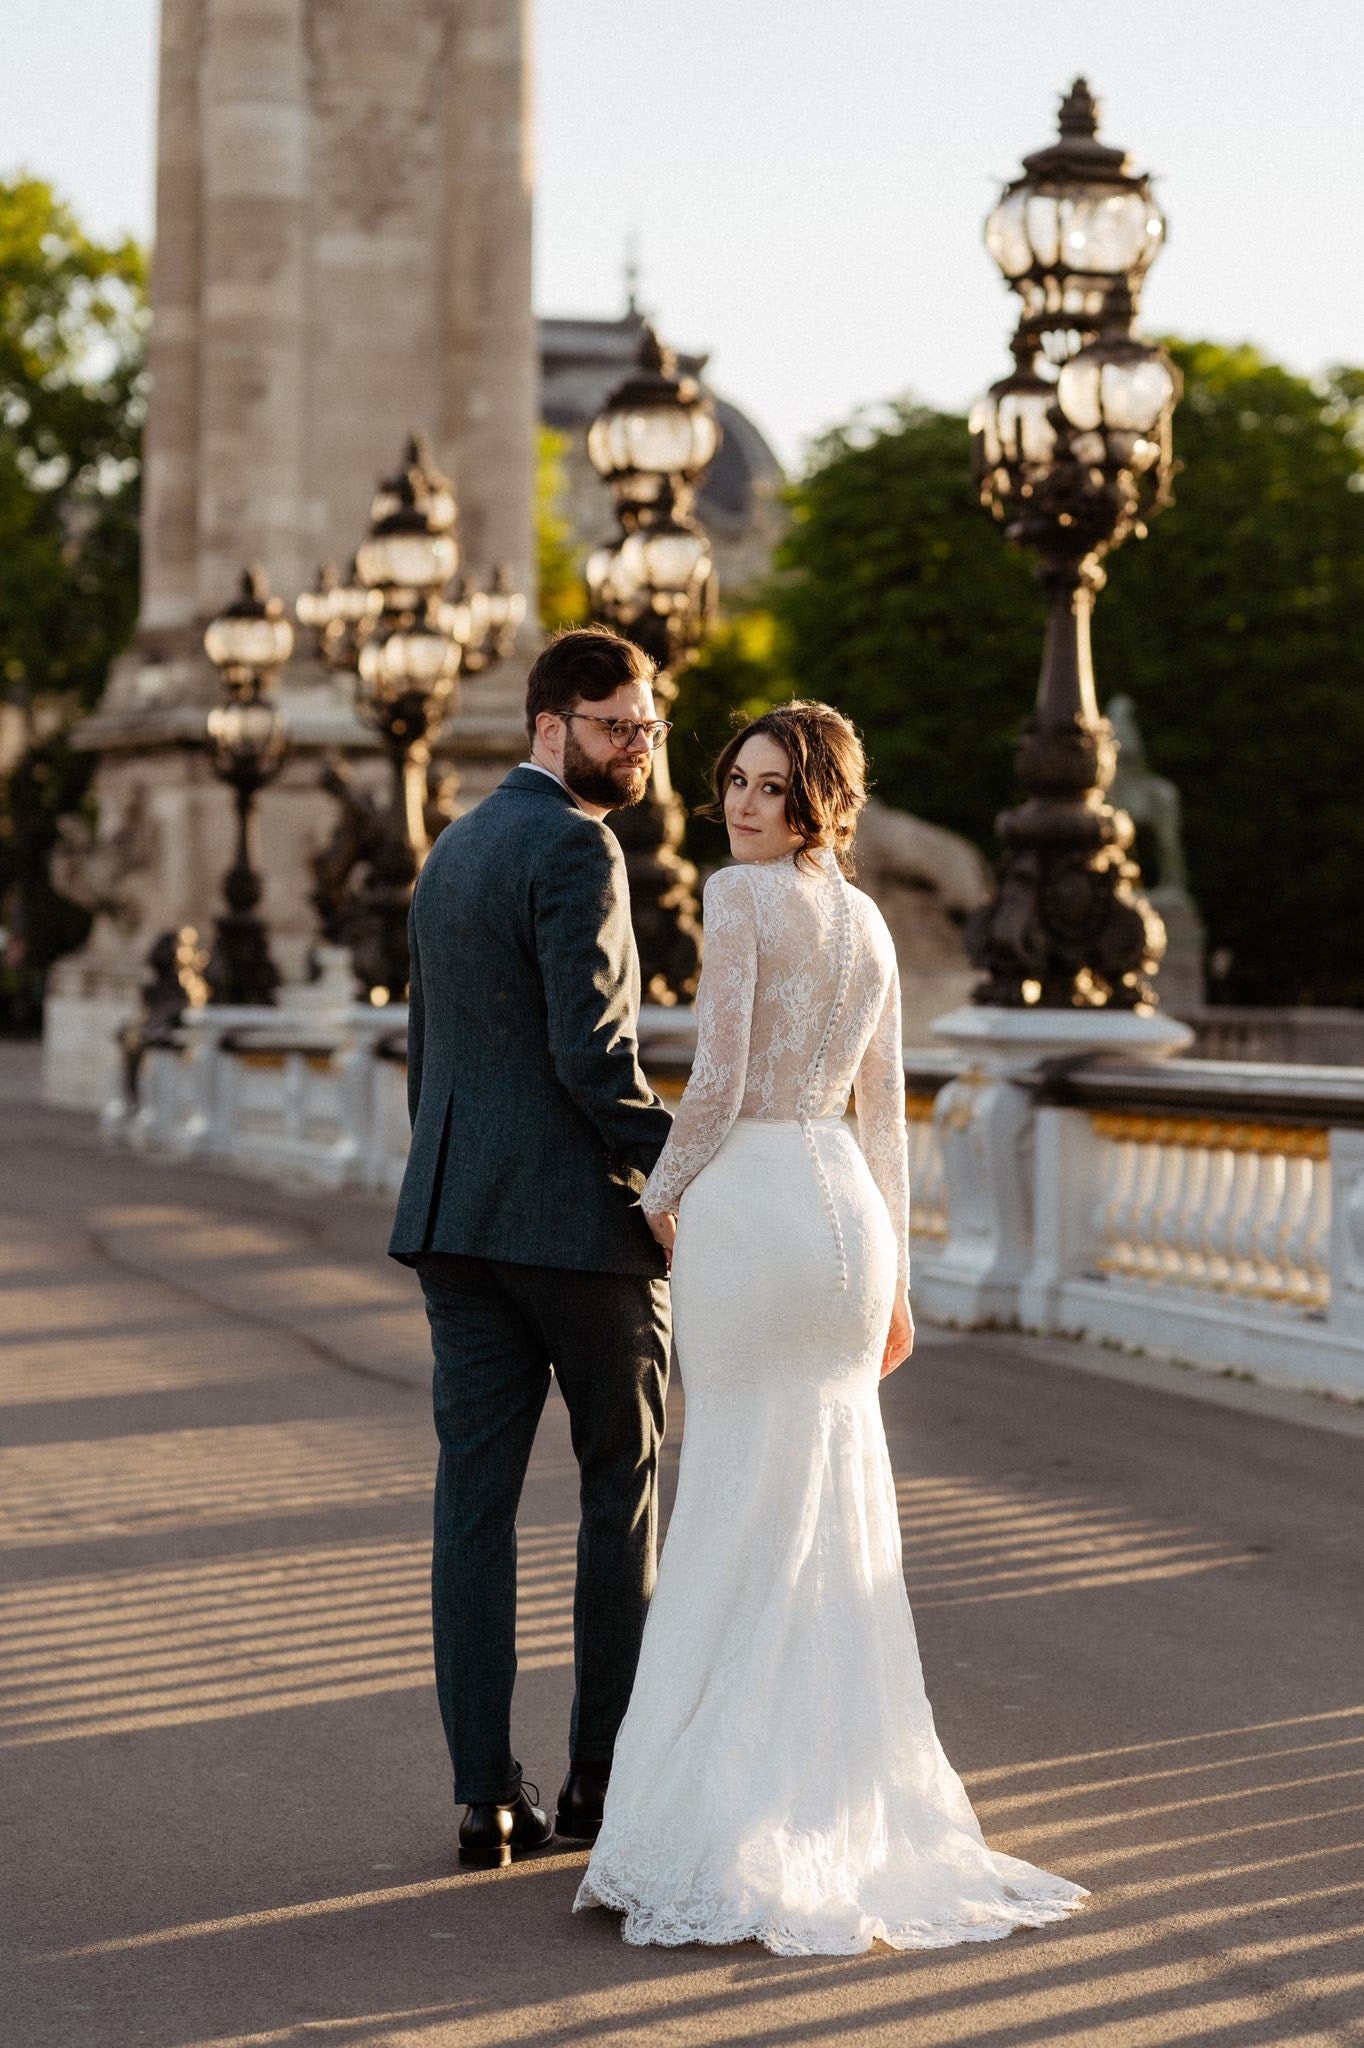 Timeless Wedding Dresses To Lookout : Body Suit Long Sleeves + Sheer Skirt